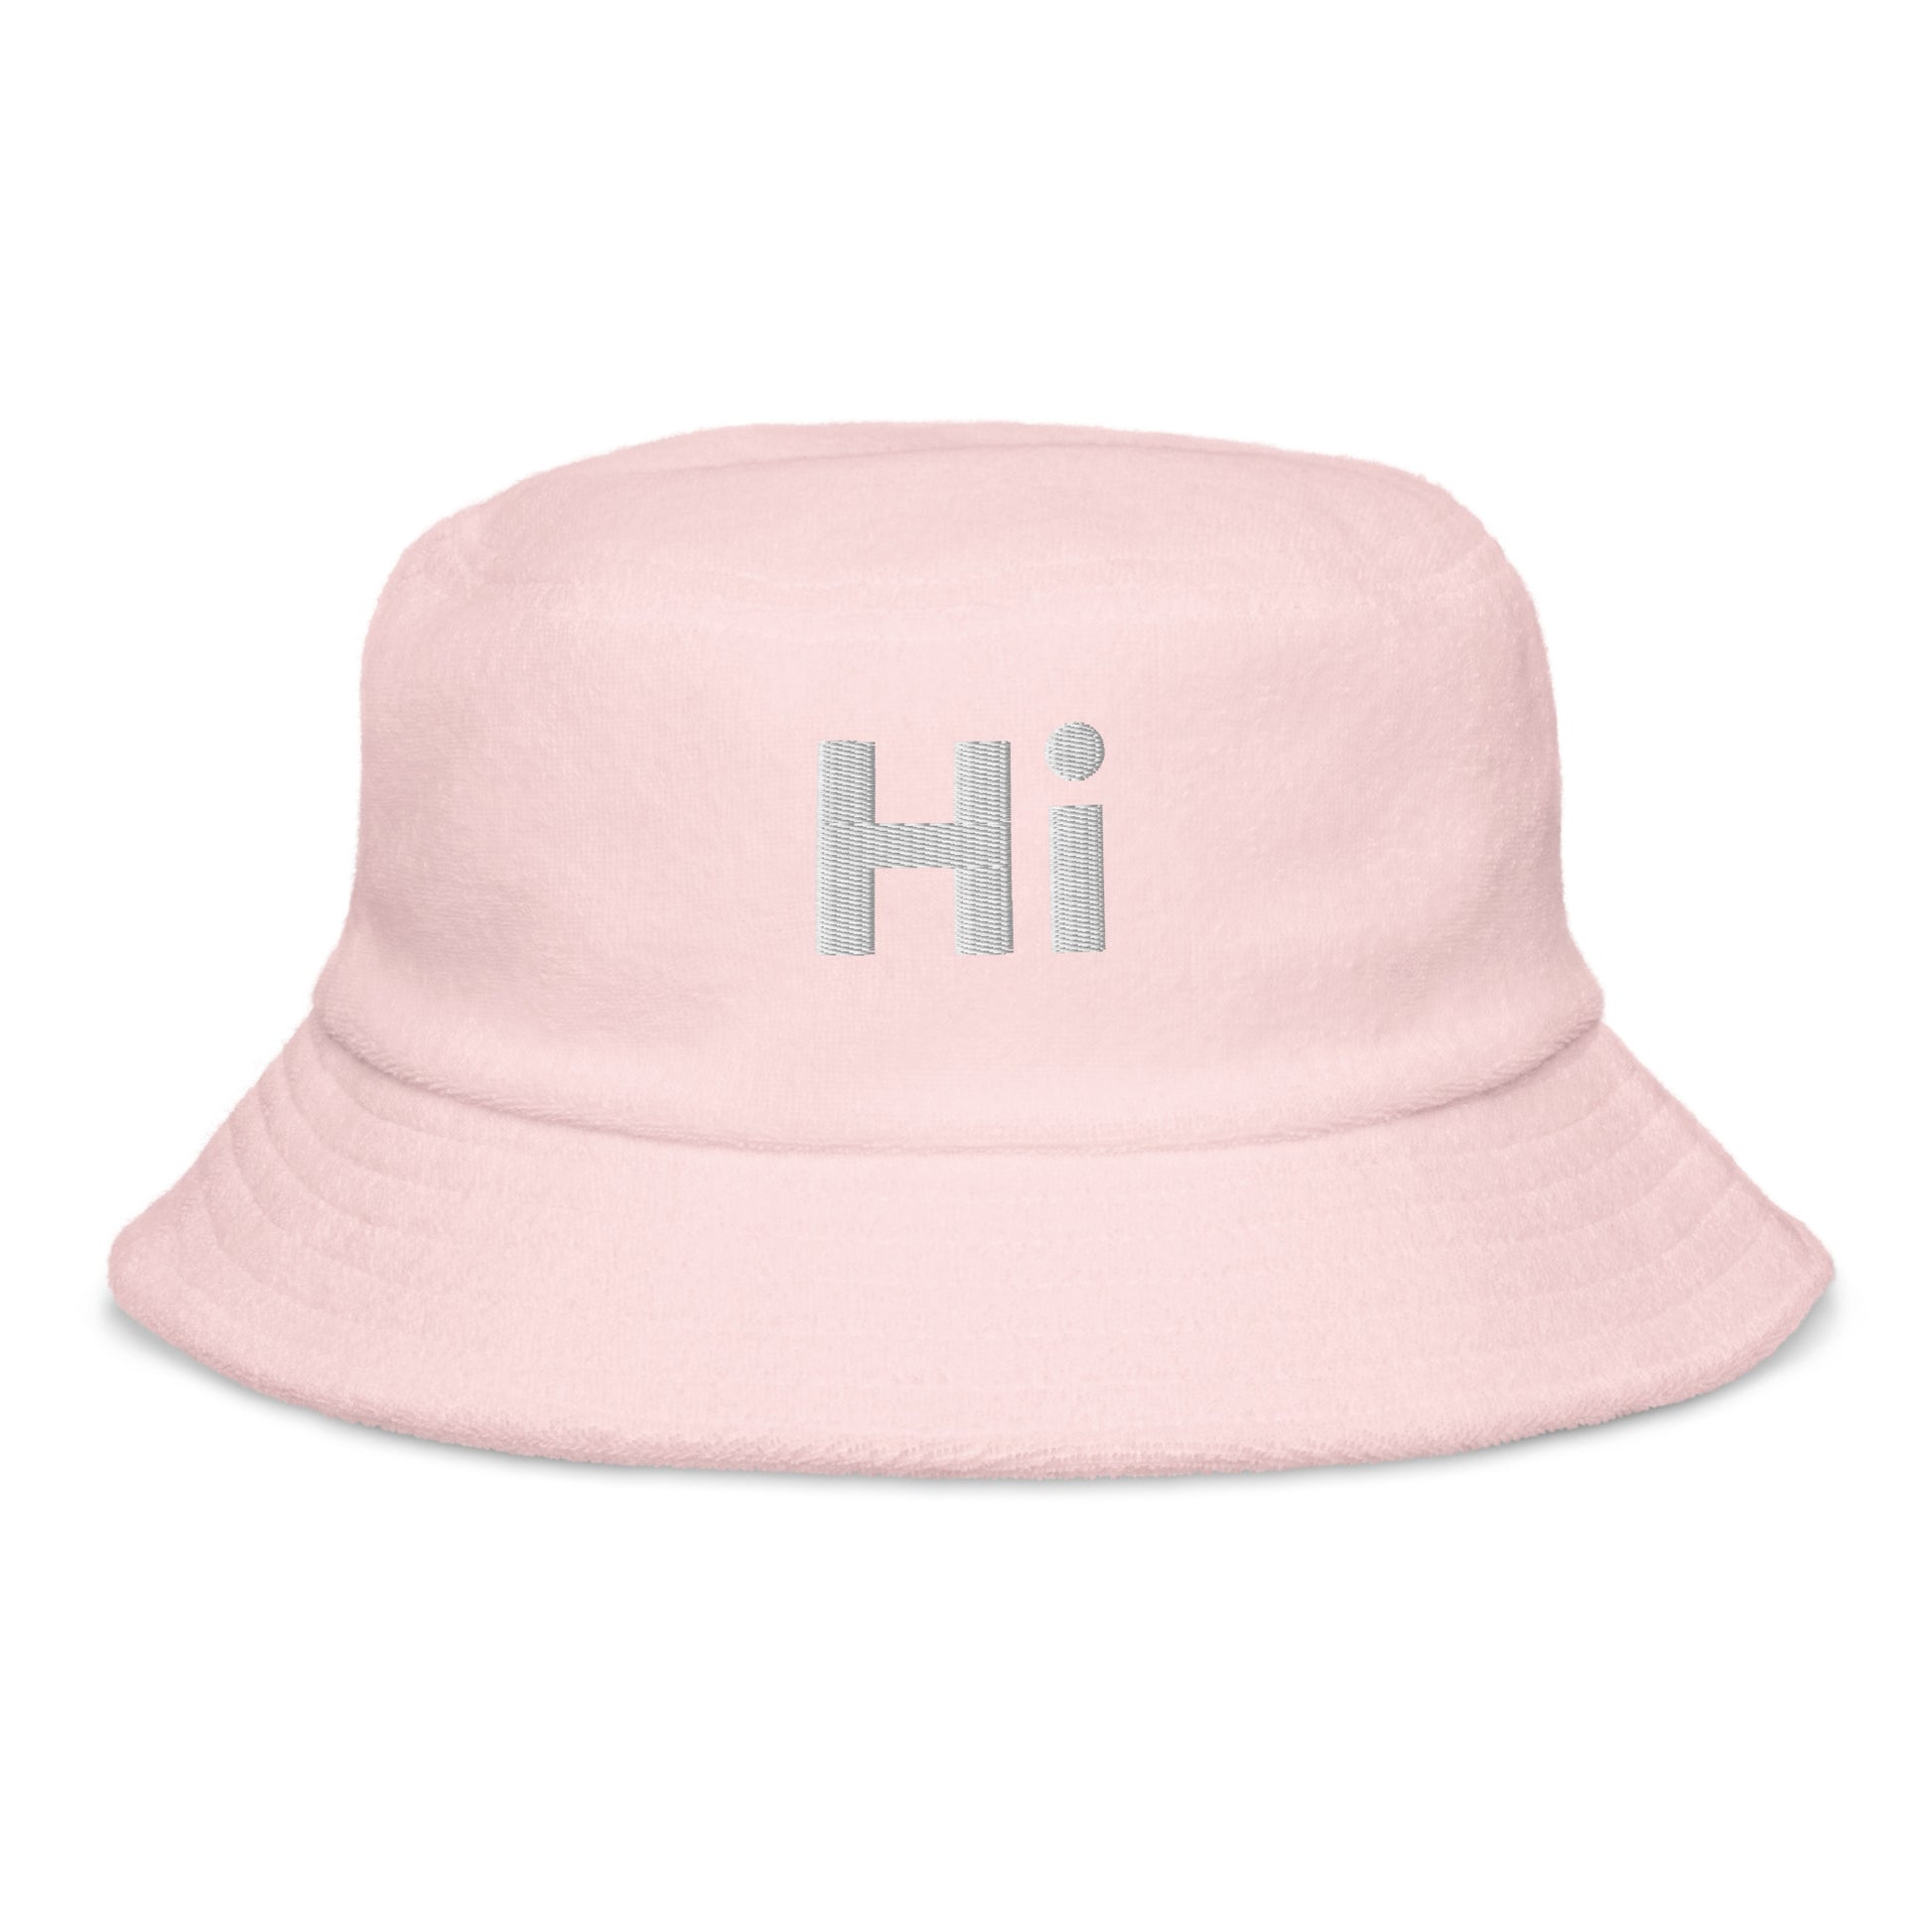 Hi Fuzzy Bucket Hat in pink by Johnny Michael at HiJohnny.com. It’s fuzzy, fashionable and friendly. Put it on your head and go greet the world.